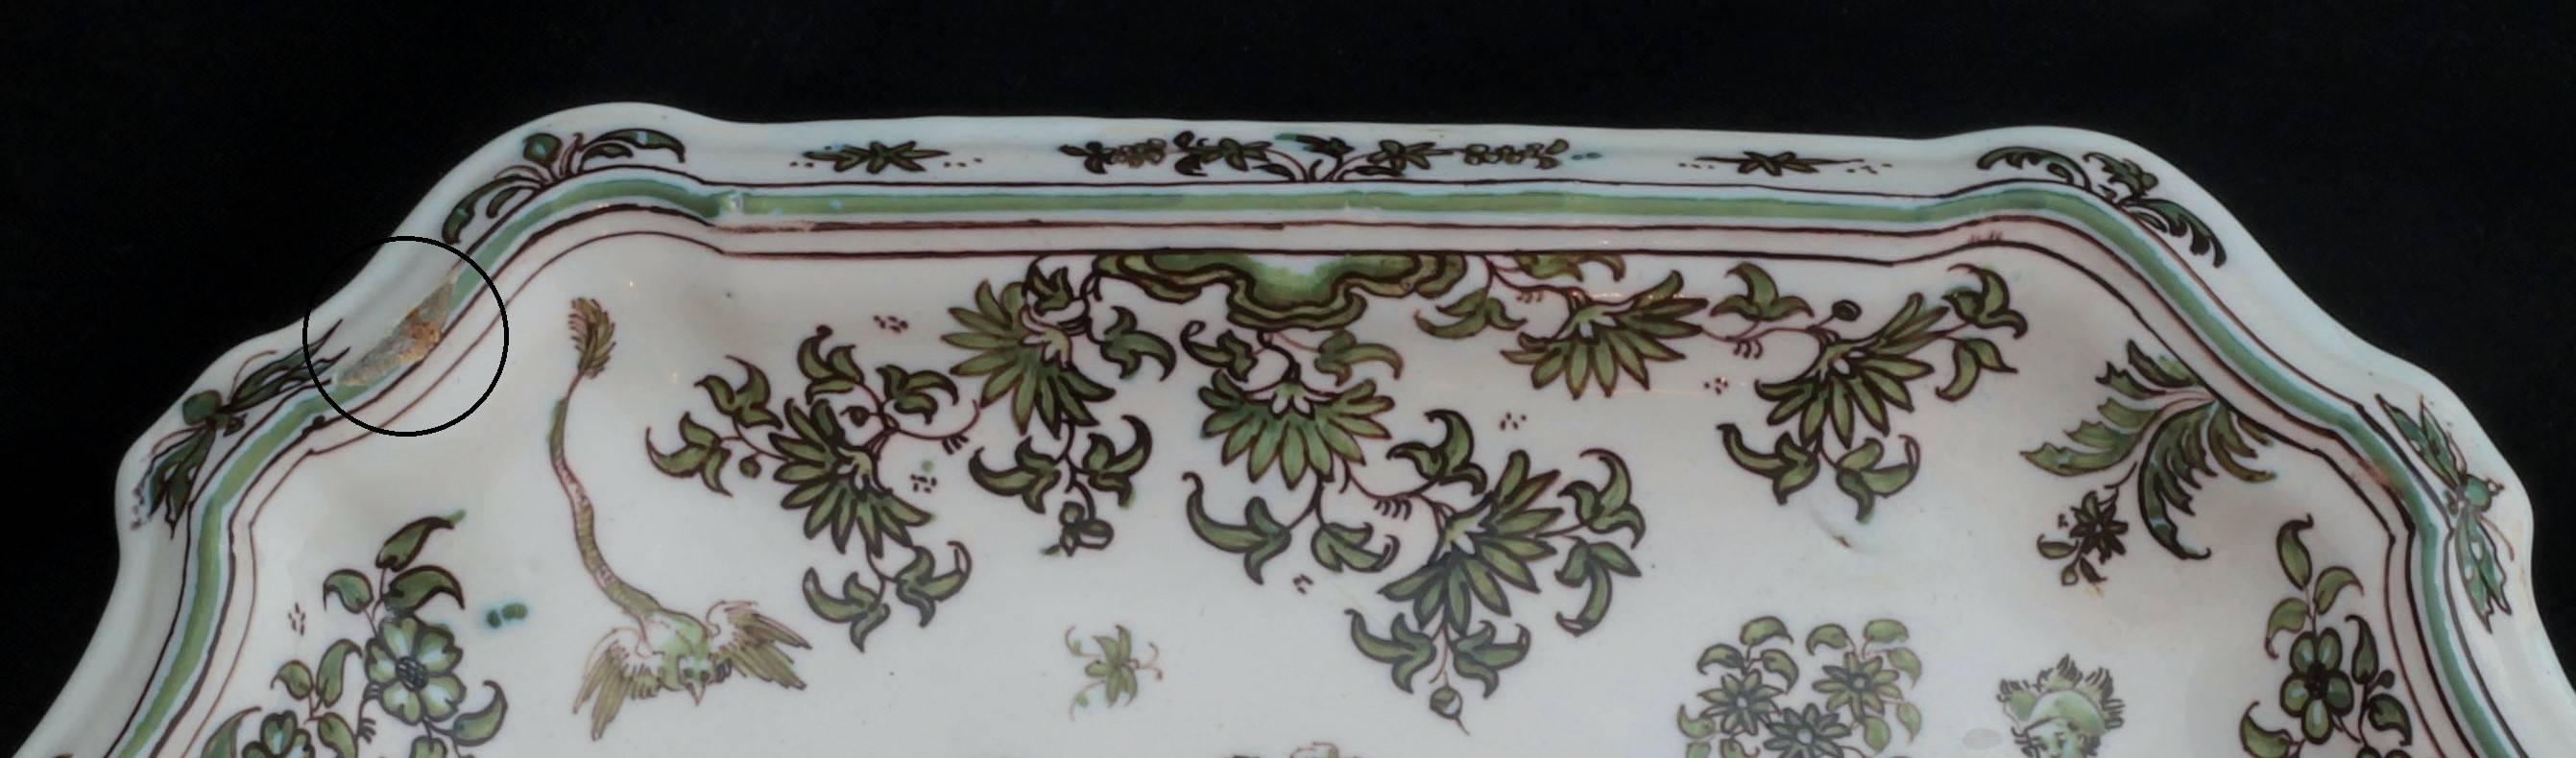 Tray in Faience of Moustiers ‘France’ with Grotesques, 18th Century 2